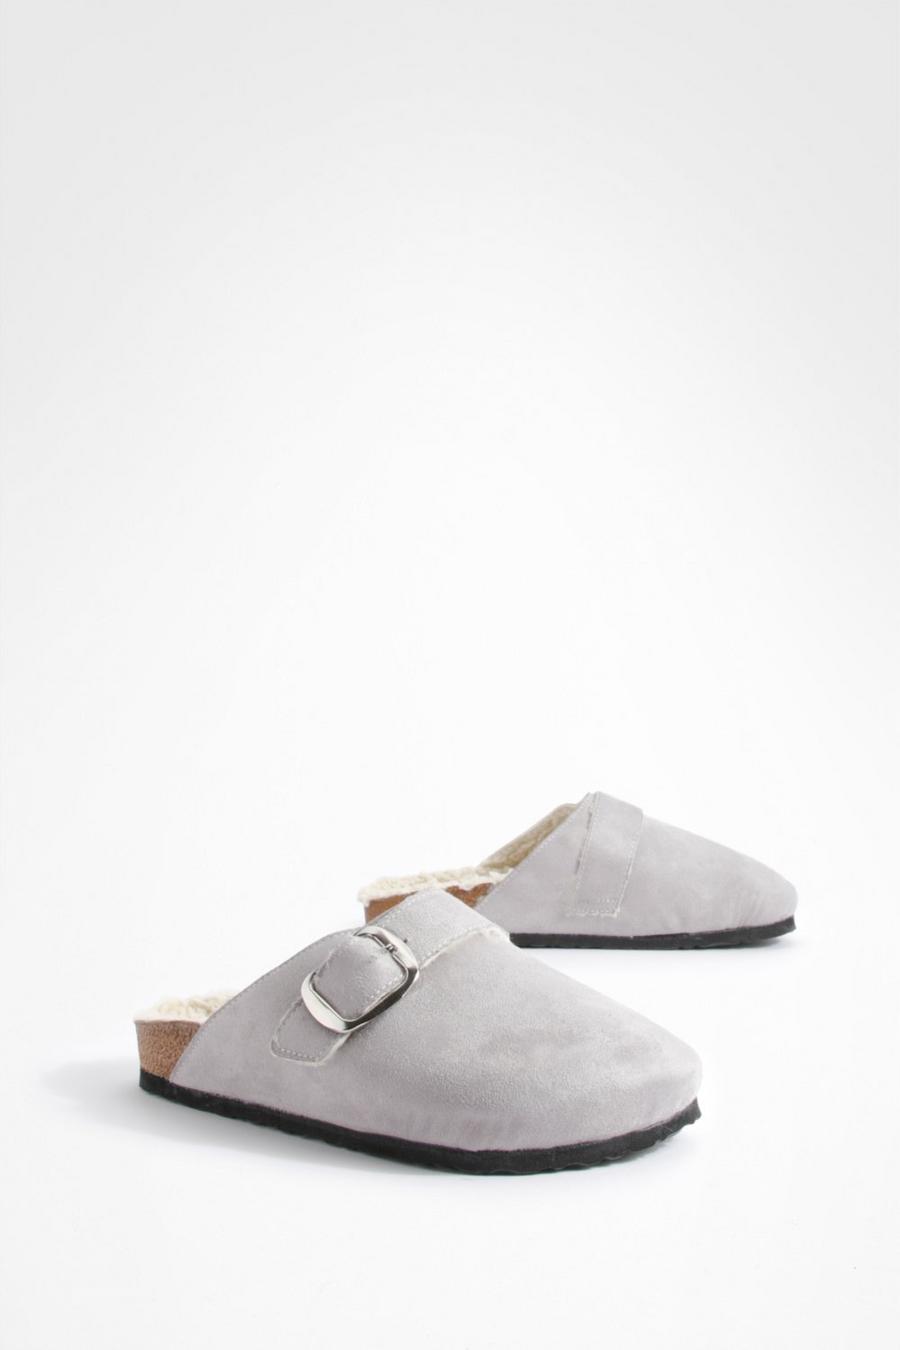 Light grey Wide Width Oversized Buckle Borg Lined Clogs